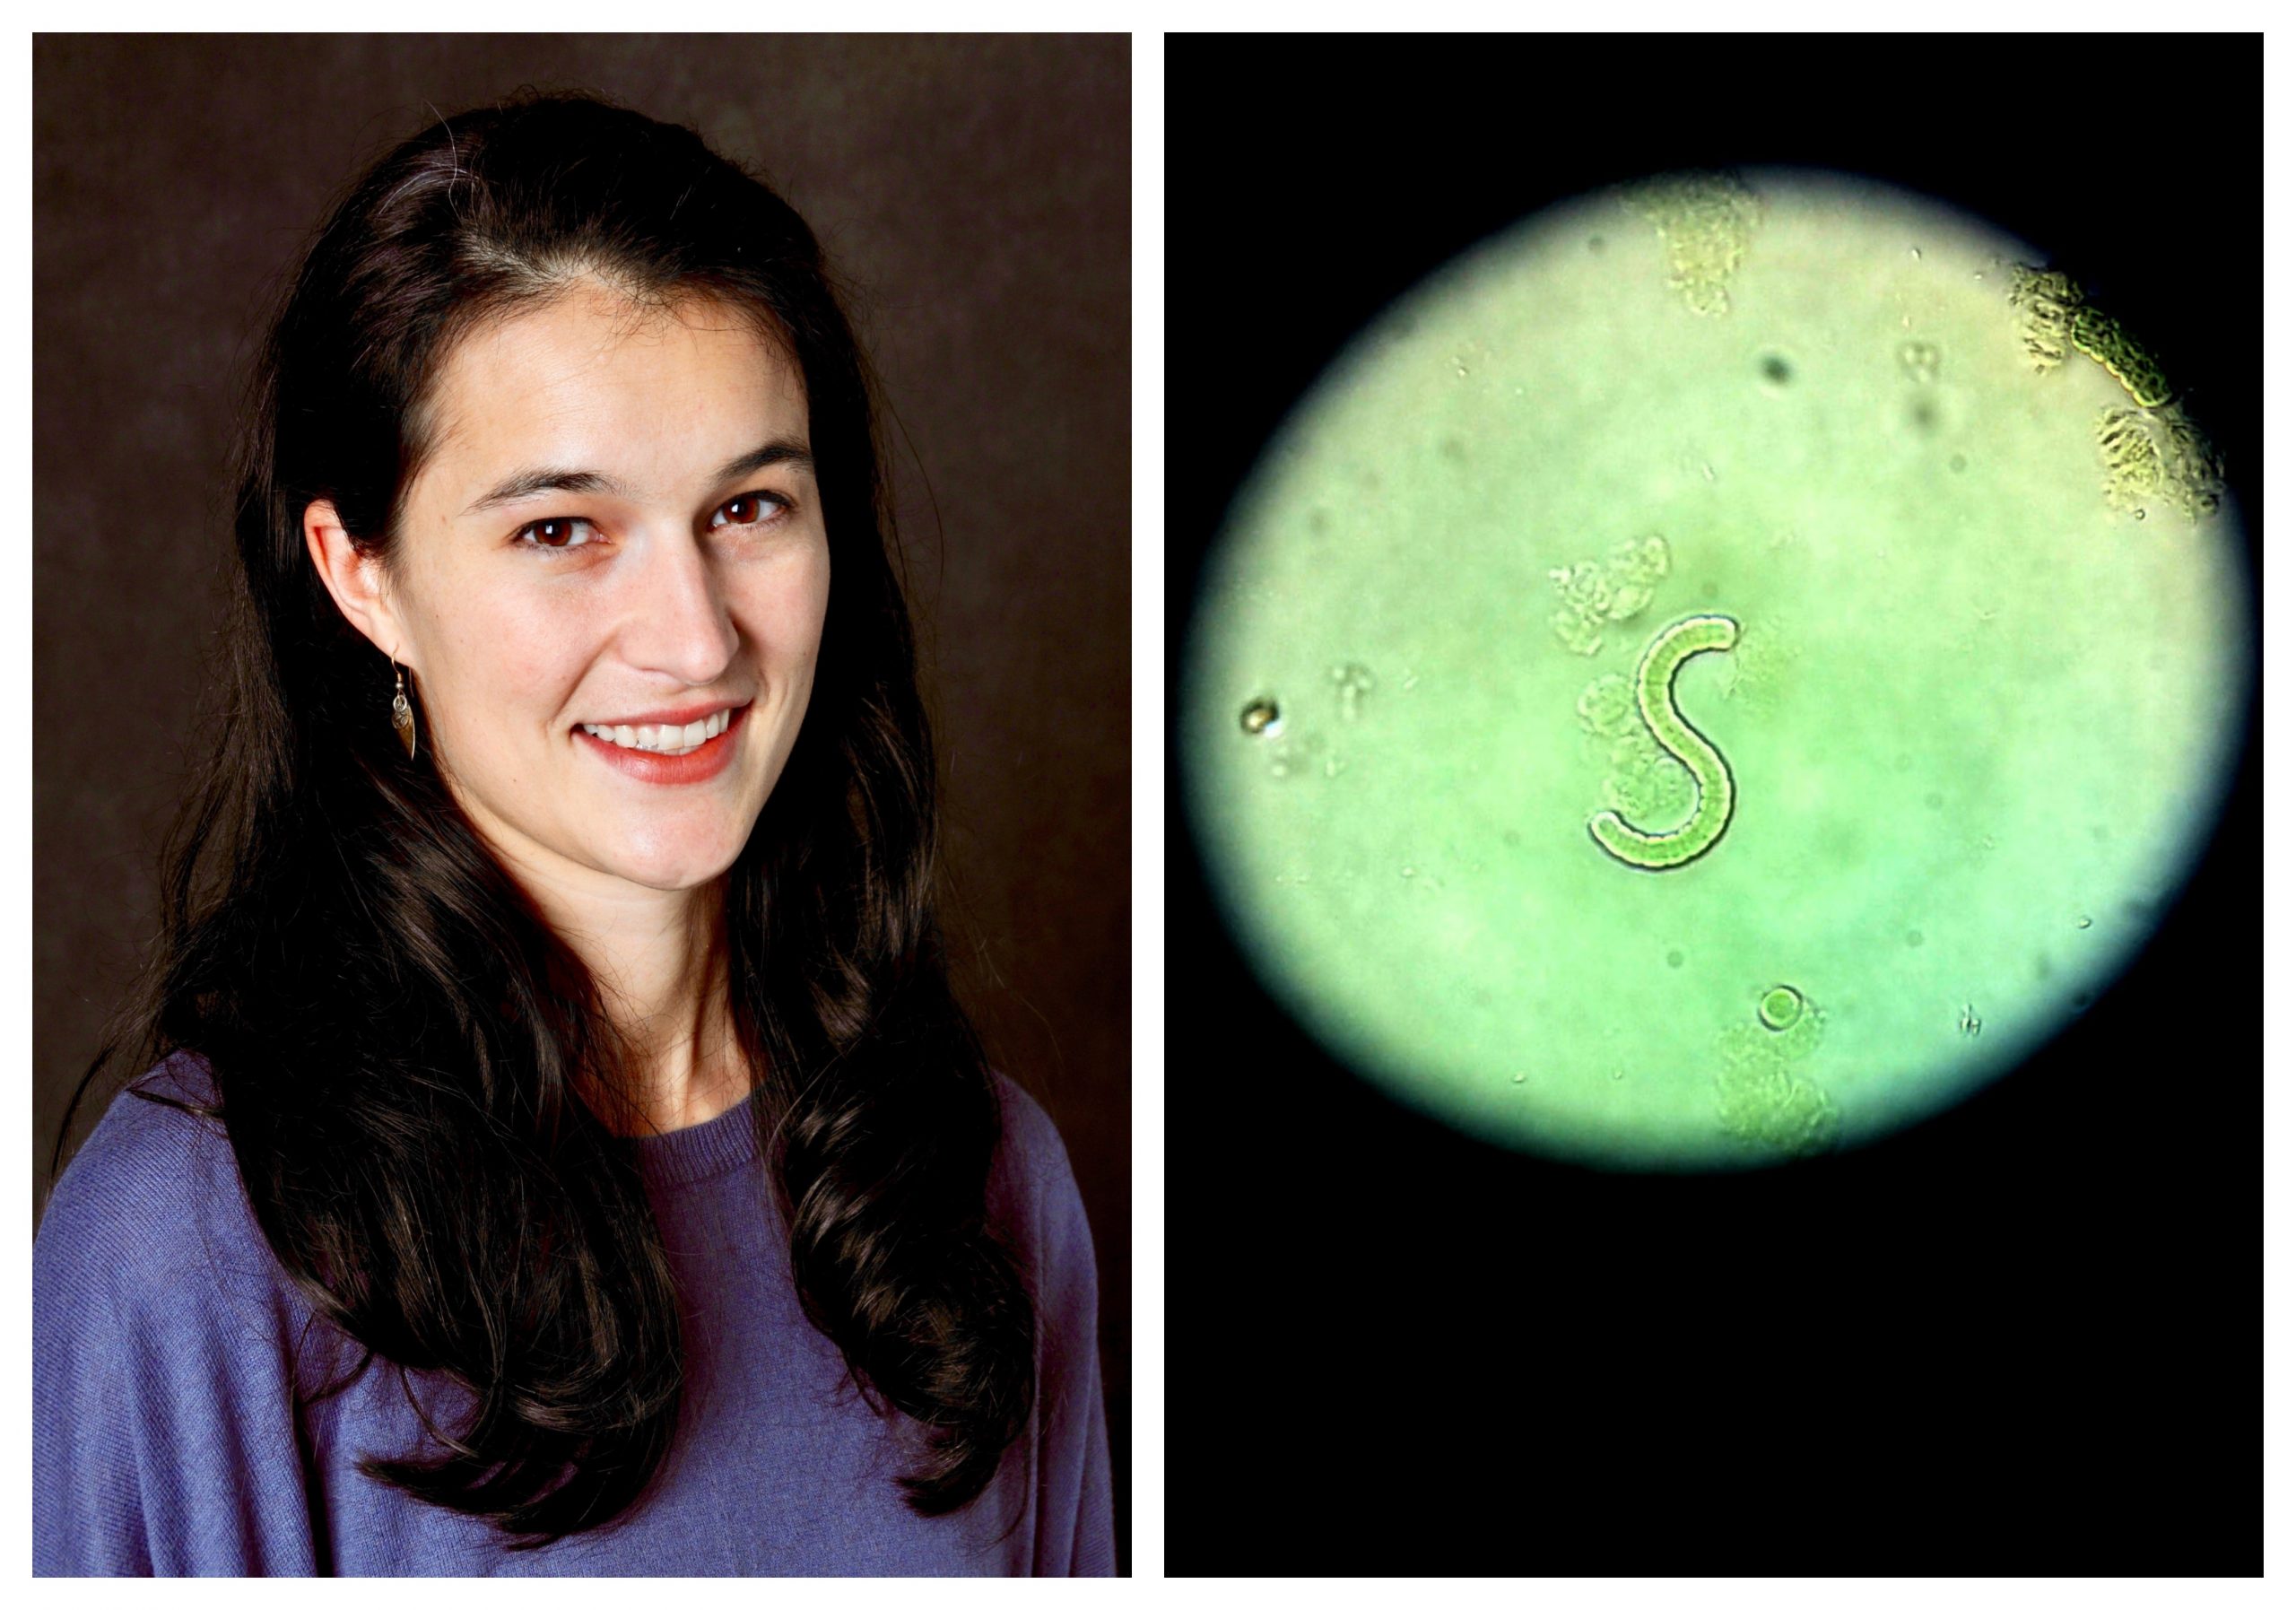 A woman with long dark hair, partly pinned back, who's wearing a purple sweater. Right, a pale green circle illuminated on black, with an S-shaped blue-green algae in center.